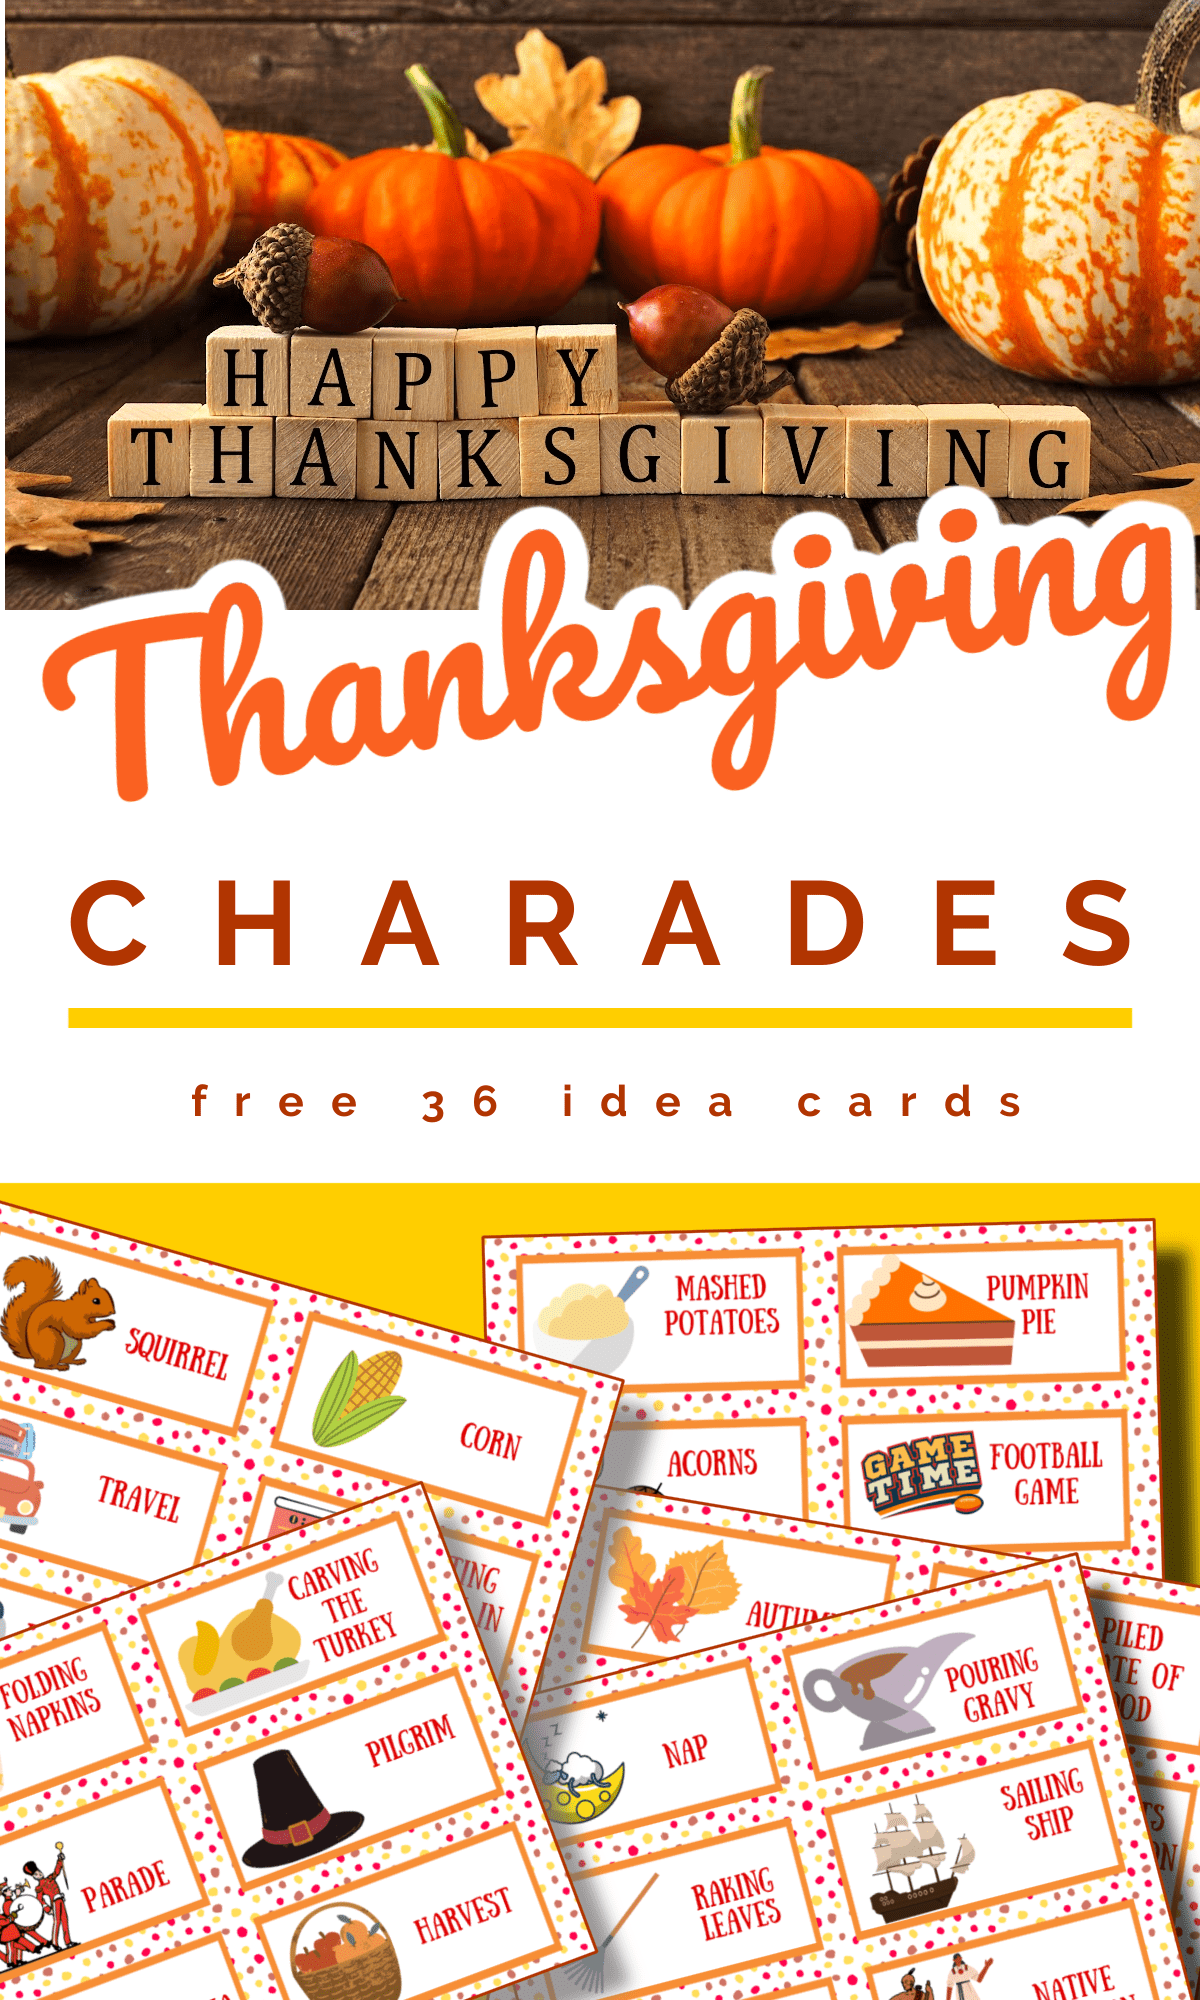 top image - Thanksgiving sign and pumpkins, bottom image - autumn colored multiple charades game cards with title text reading Thanksgiving Charades